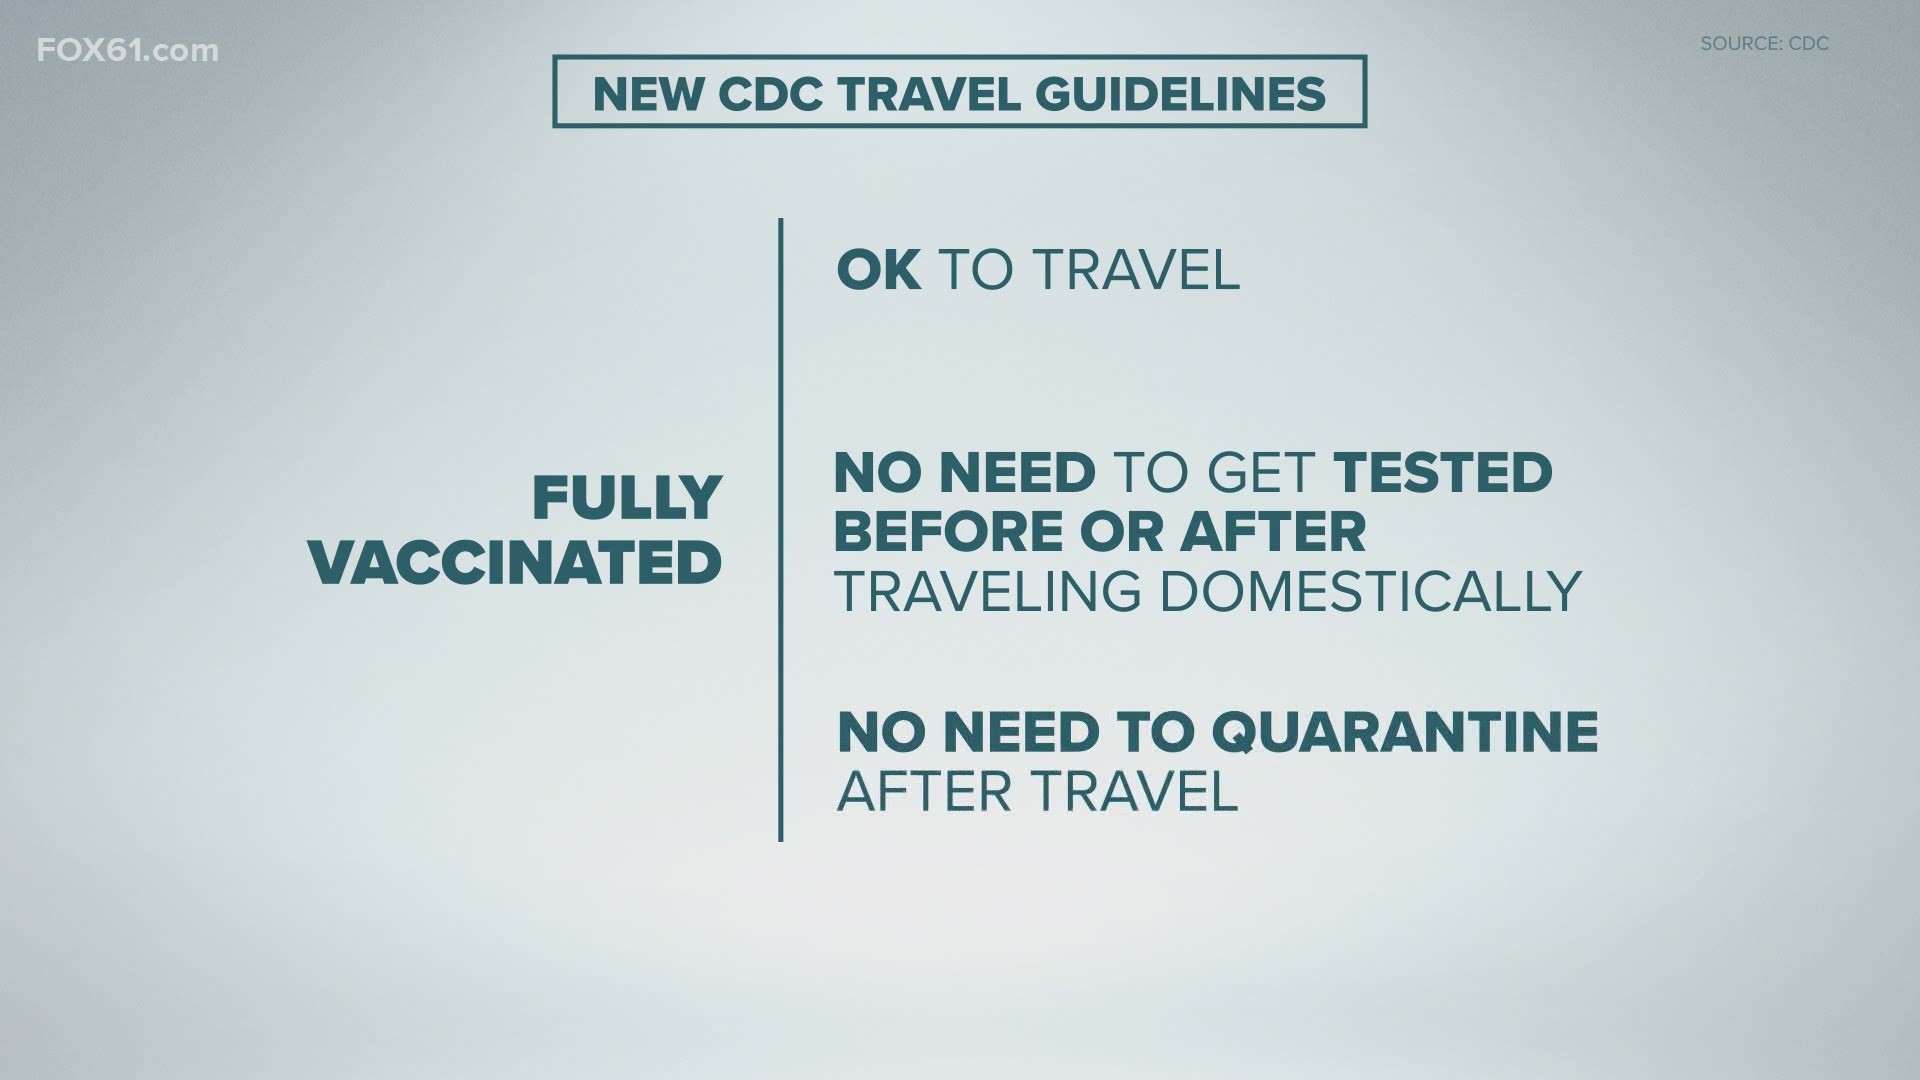 The CDC says fully vaccinated people can travel without needing to get tested before or after the trip, and without needing to quarantine.